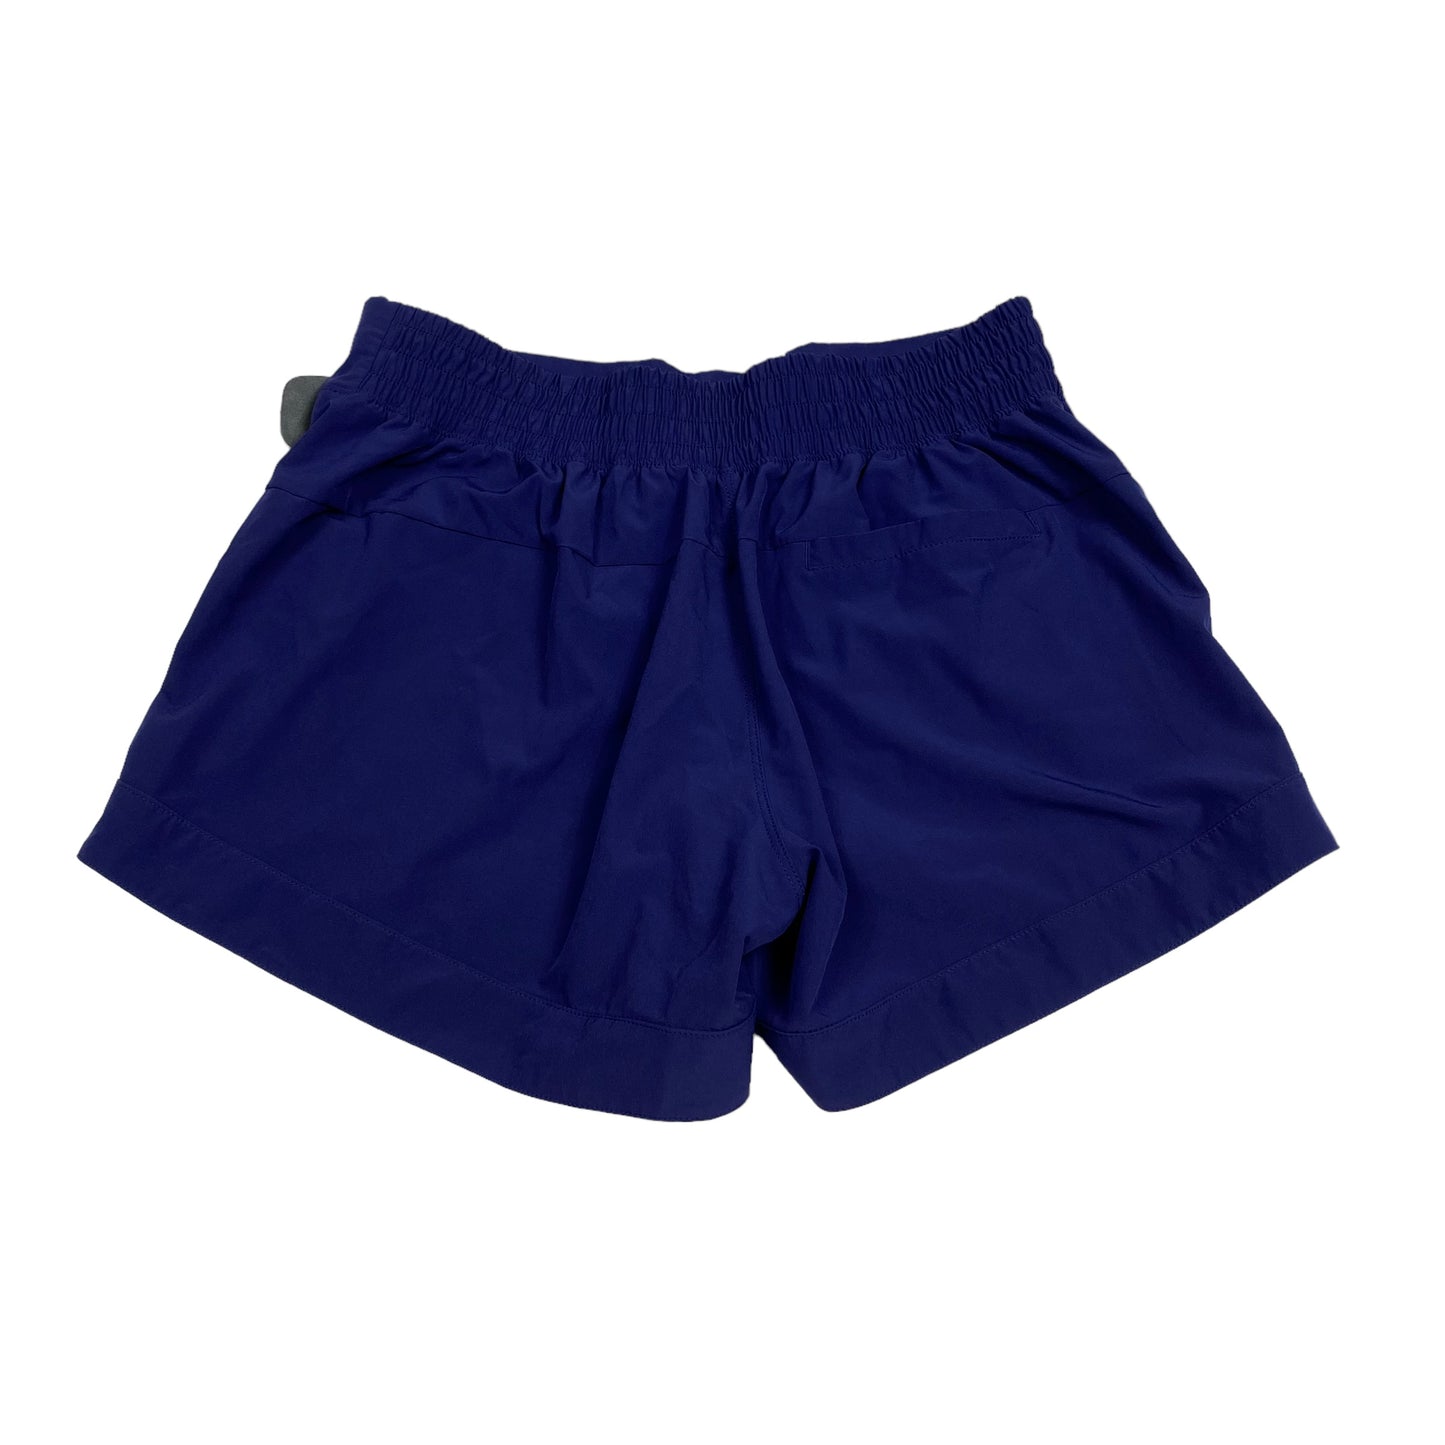 Athletic Shorts By Apana  Size: M